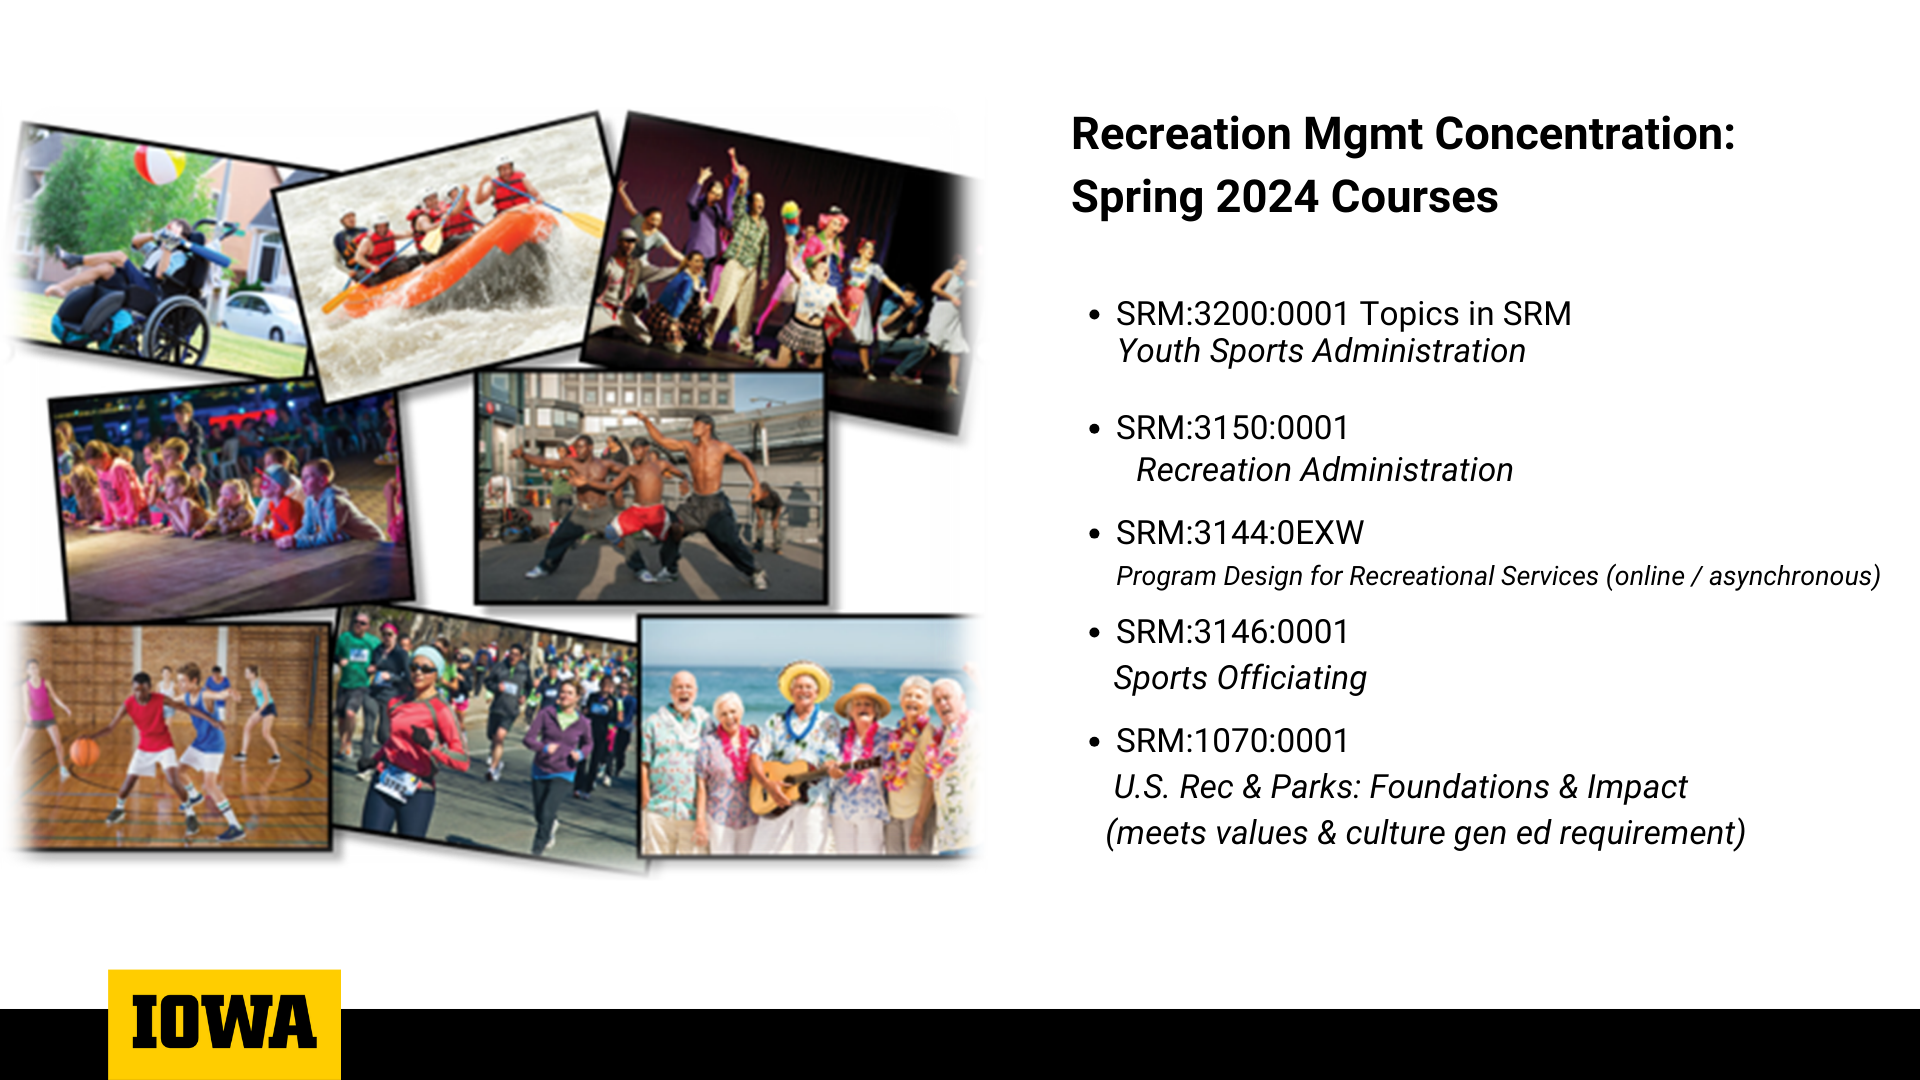 Recreation Mgmt Concentration: Spring 2024 Courses